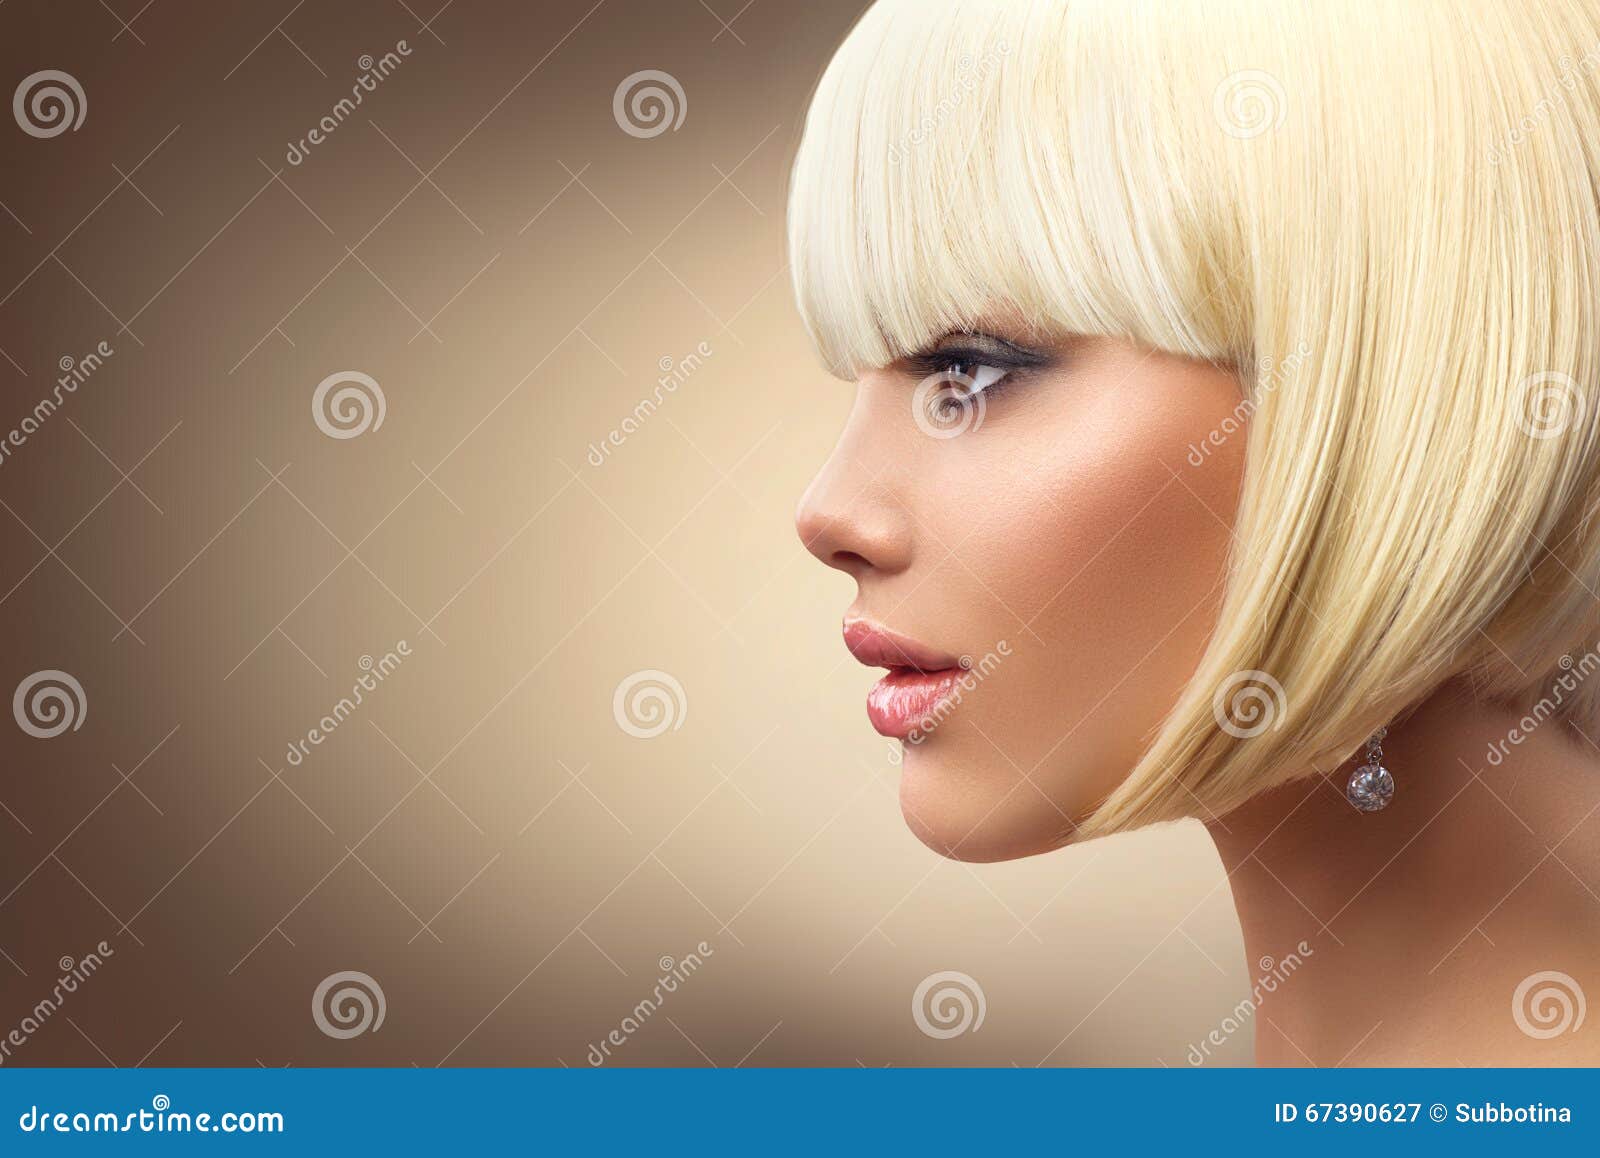 34,678 Short Blonde Hairstyles Images, Stock Photos, 3D objects, & Vectors  | Shutterstock